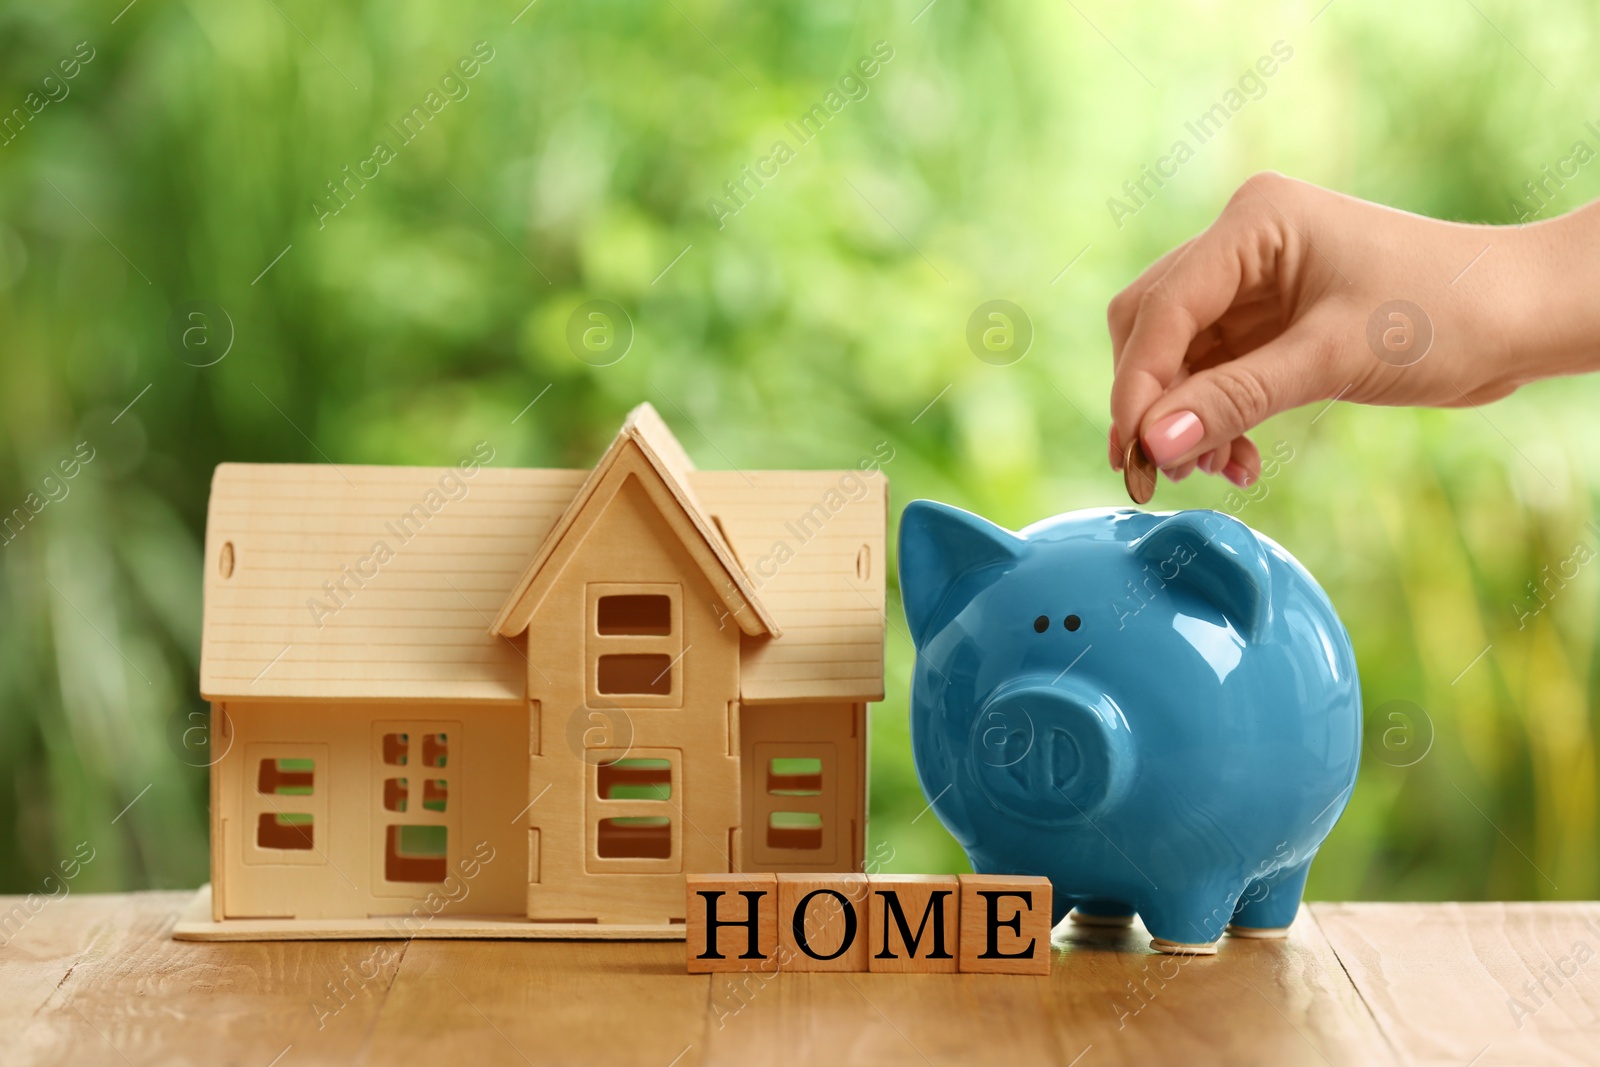 Photo of Woman putting money into piggy bank, house model and word Home made of cubes on wooden table outdoors, closeup